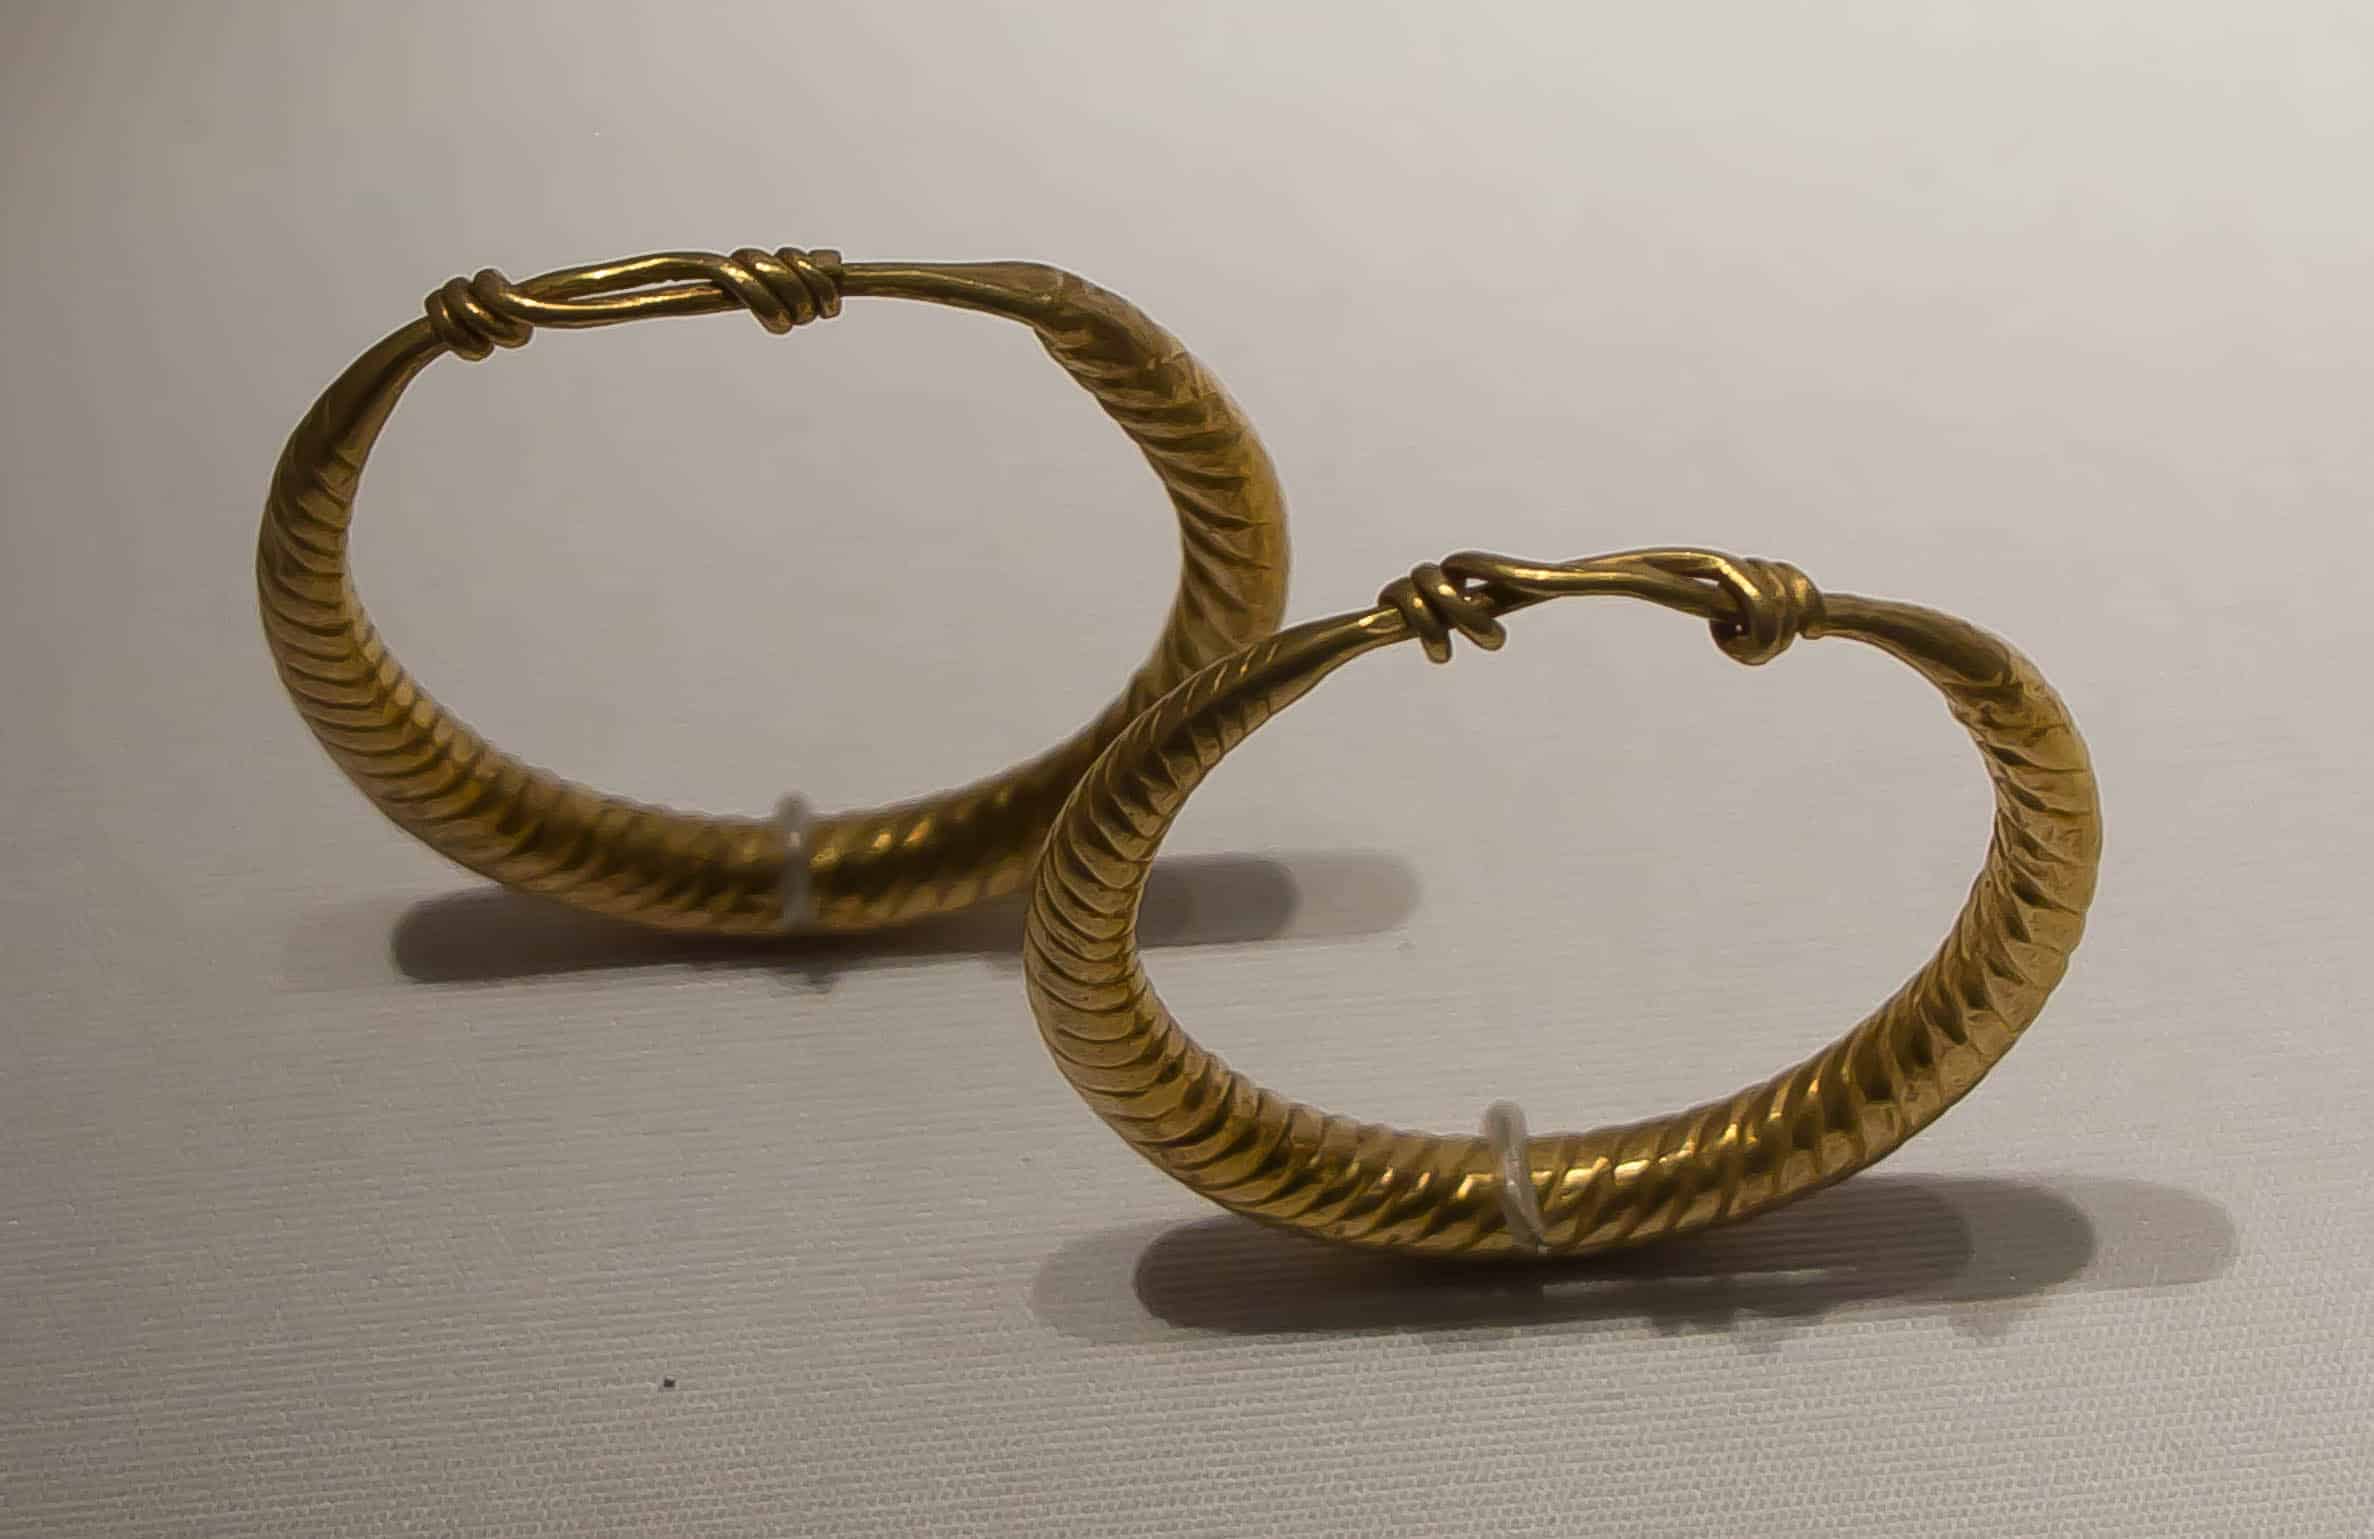 Ancient Gold Earrings.